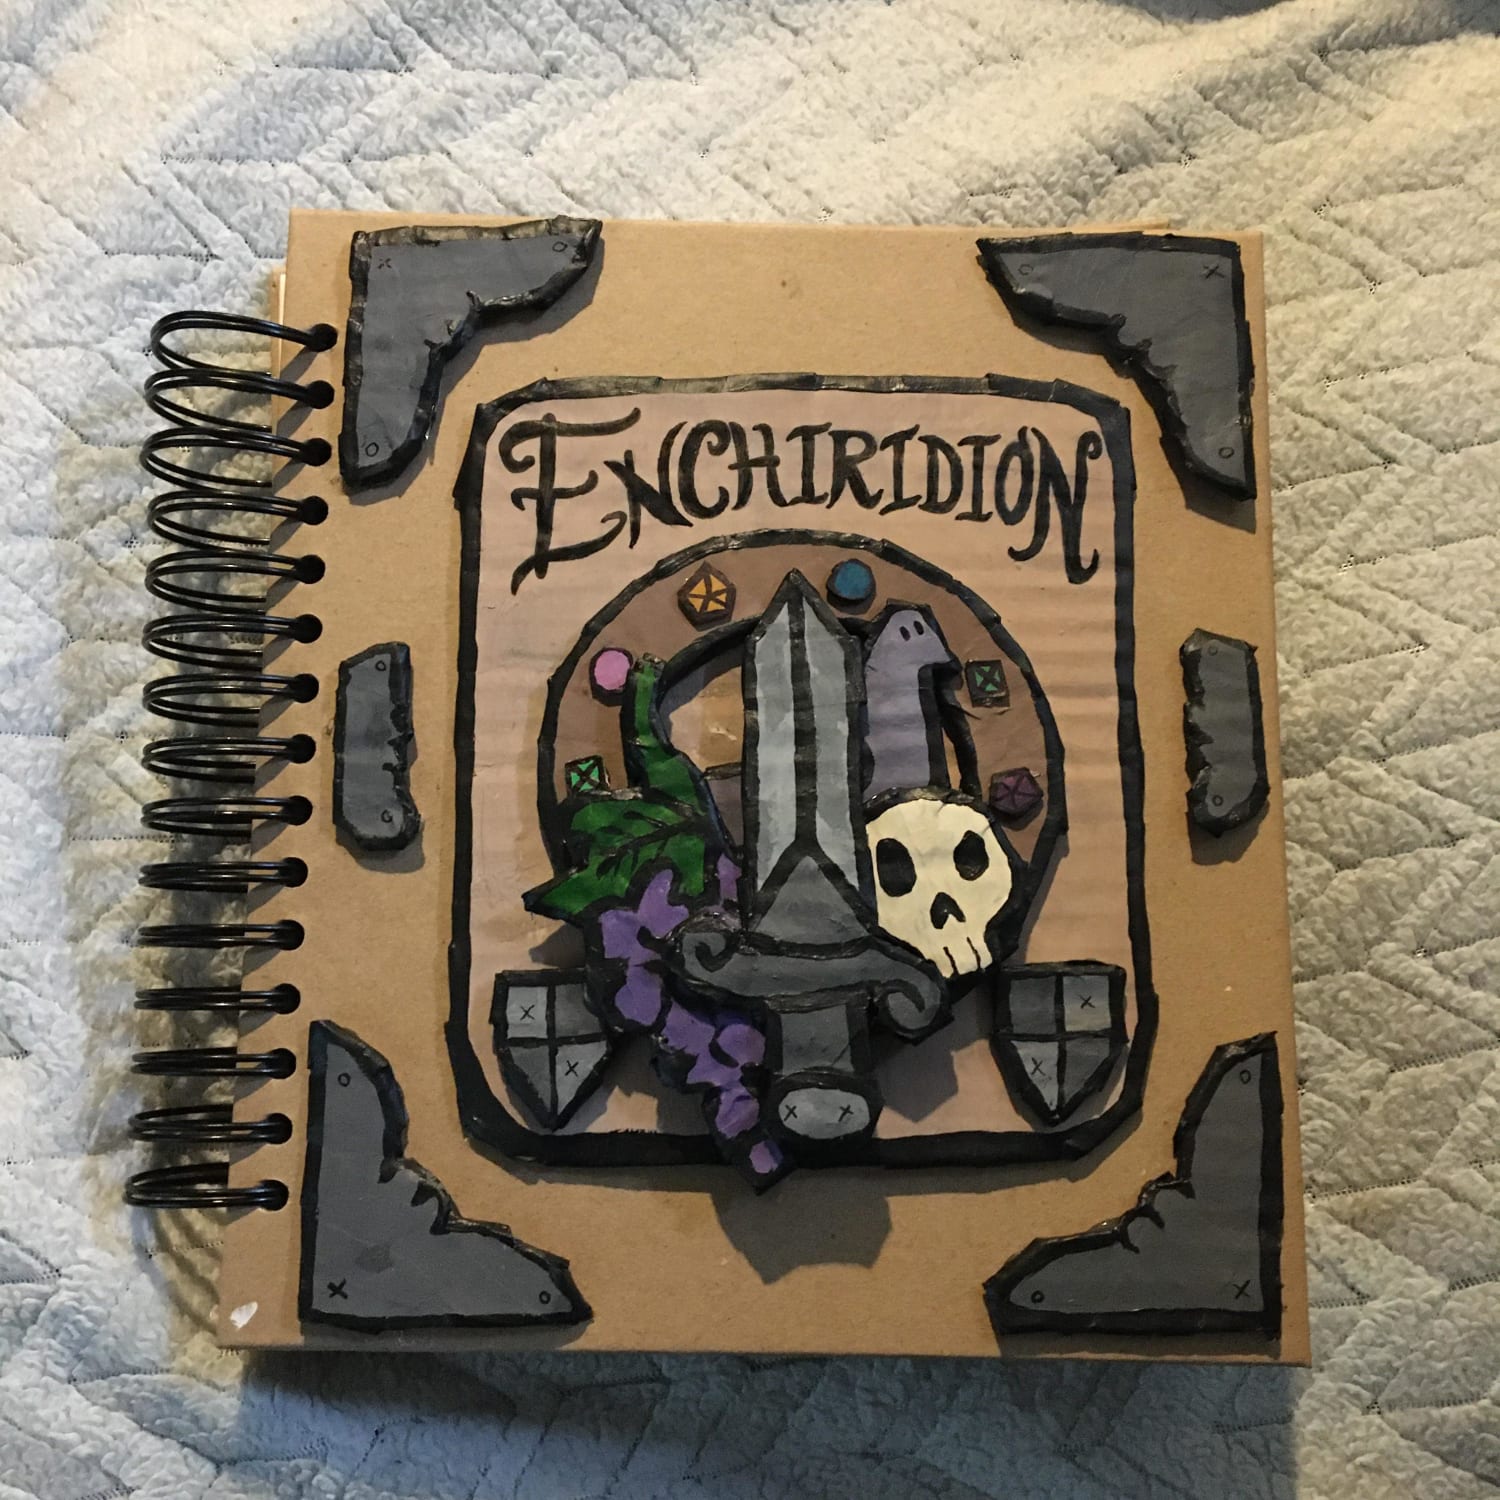 decorate a scrapbook for my boyfriend’s birthday, thought it’d be fun to make the Enchiridion from Adventure Time - first time trying something like this!